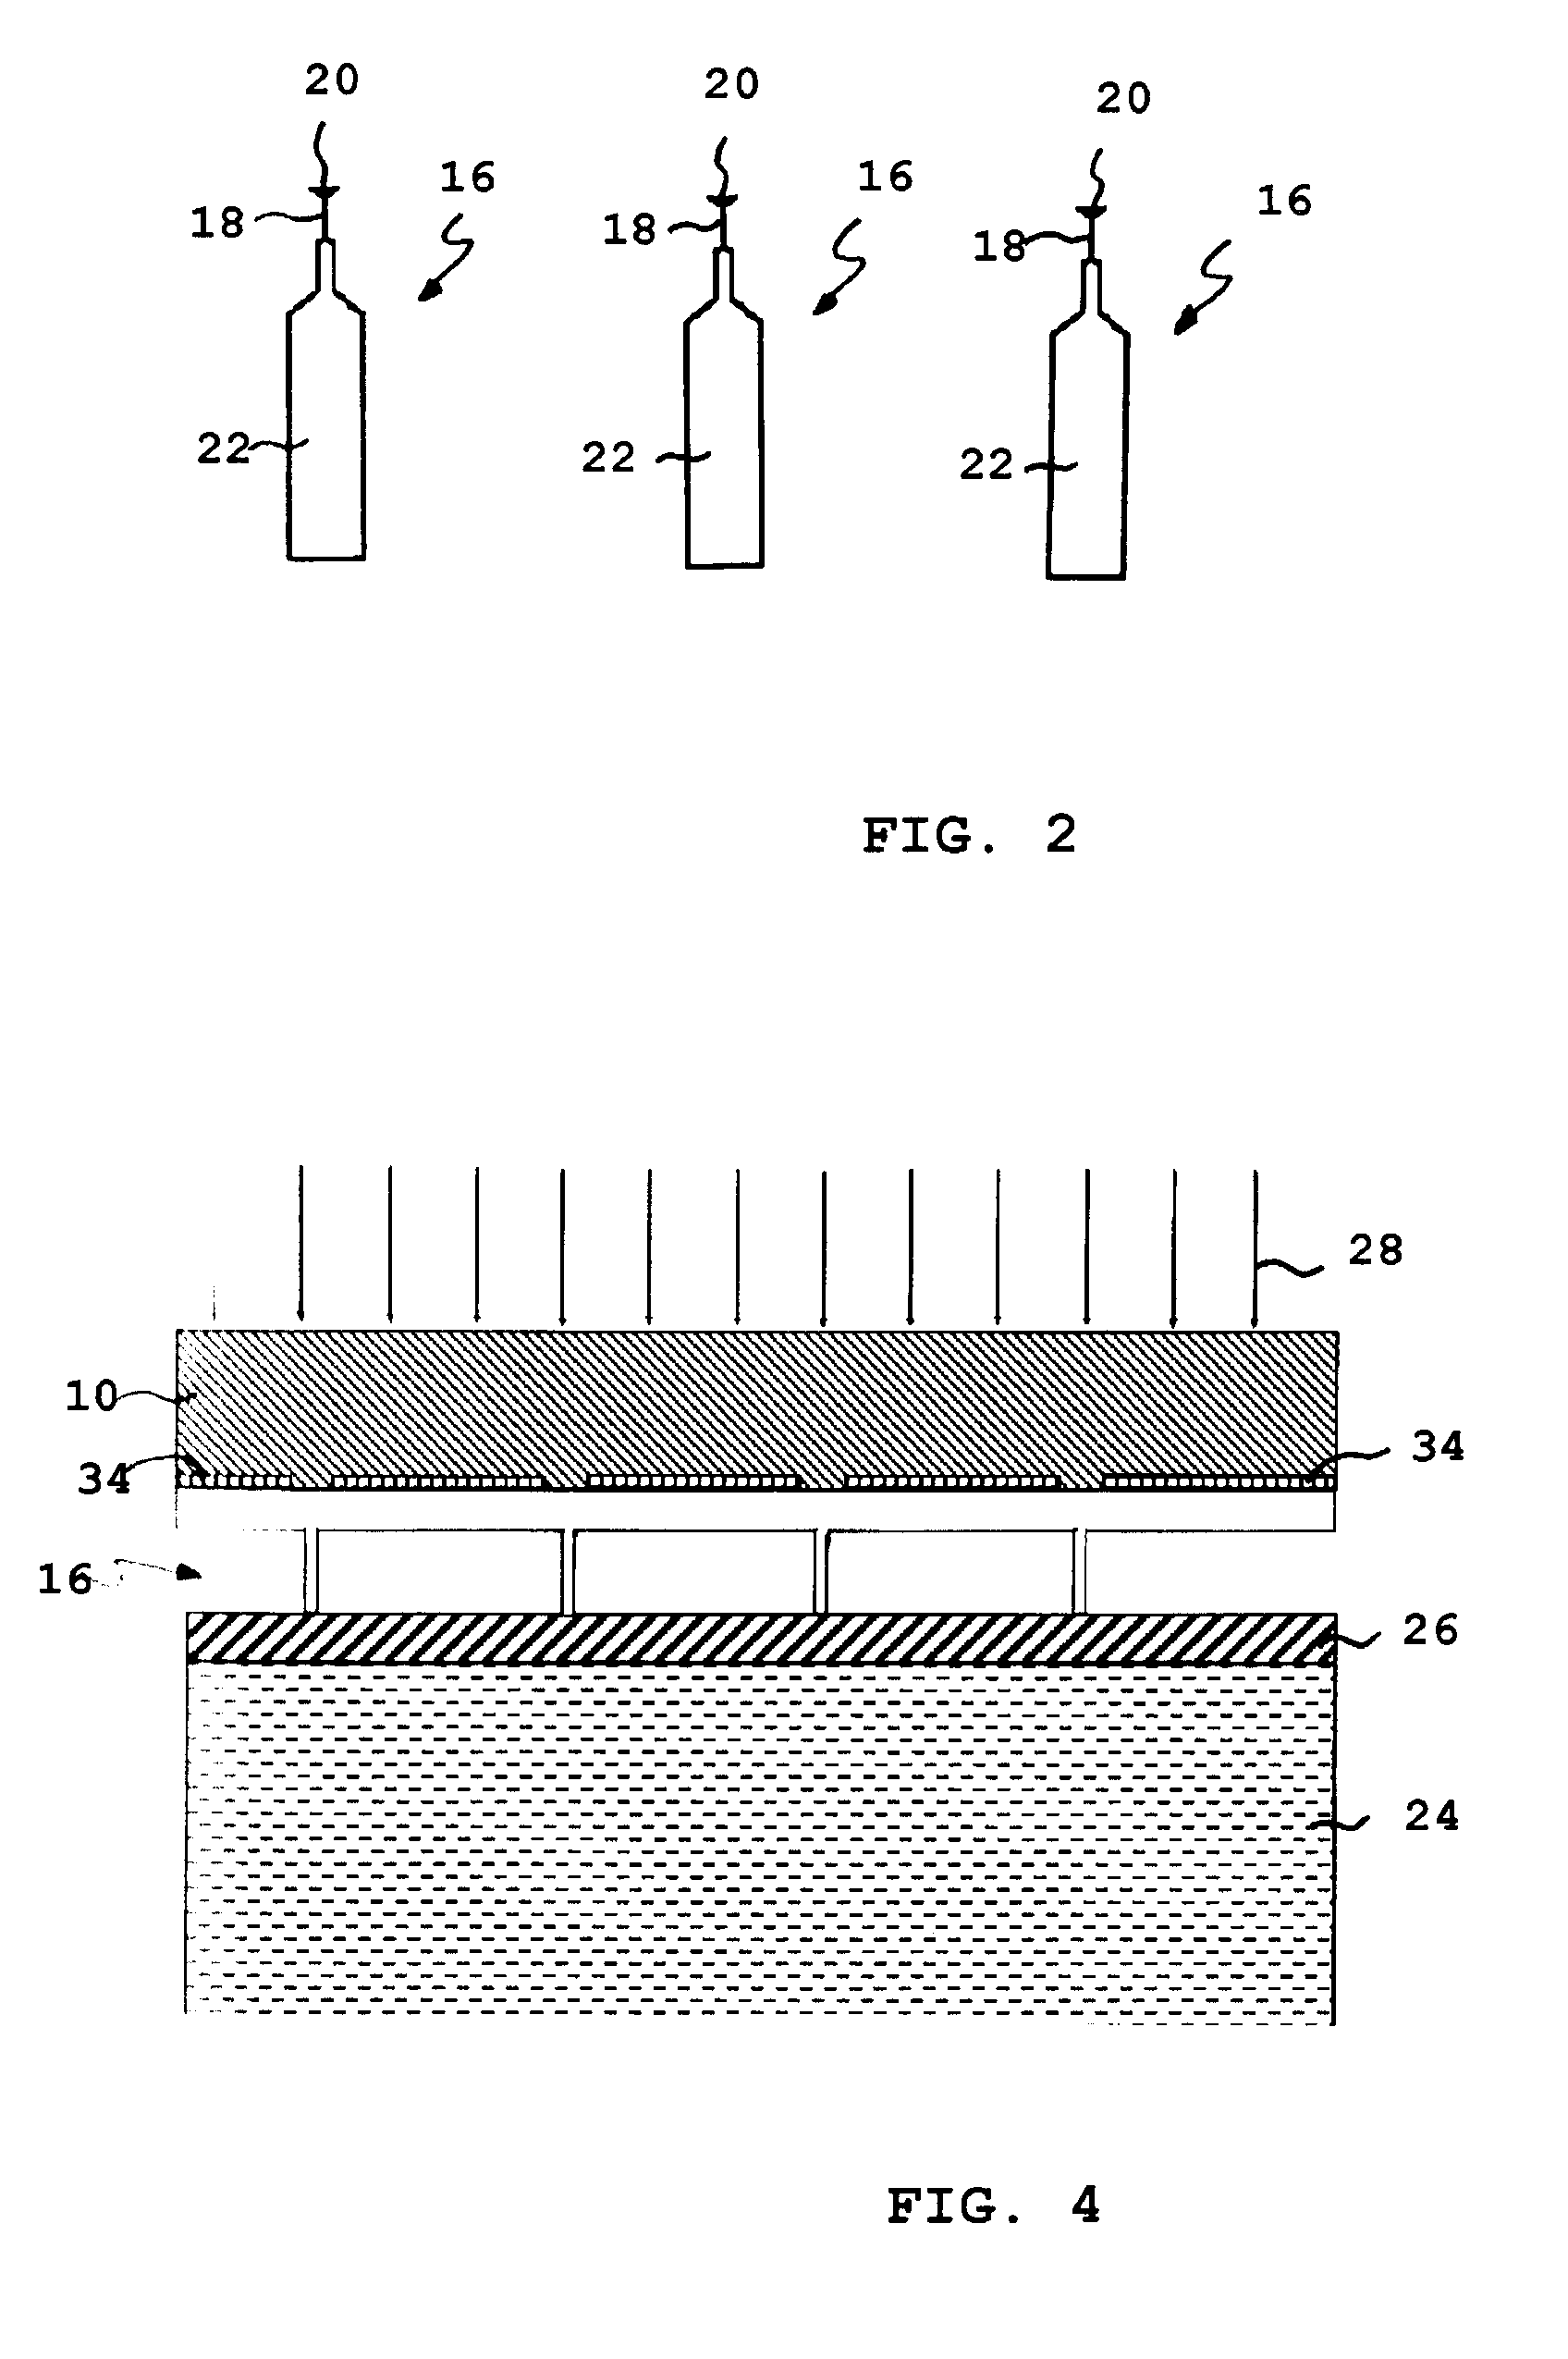 Method for the manufacture of micro structures